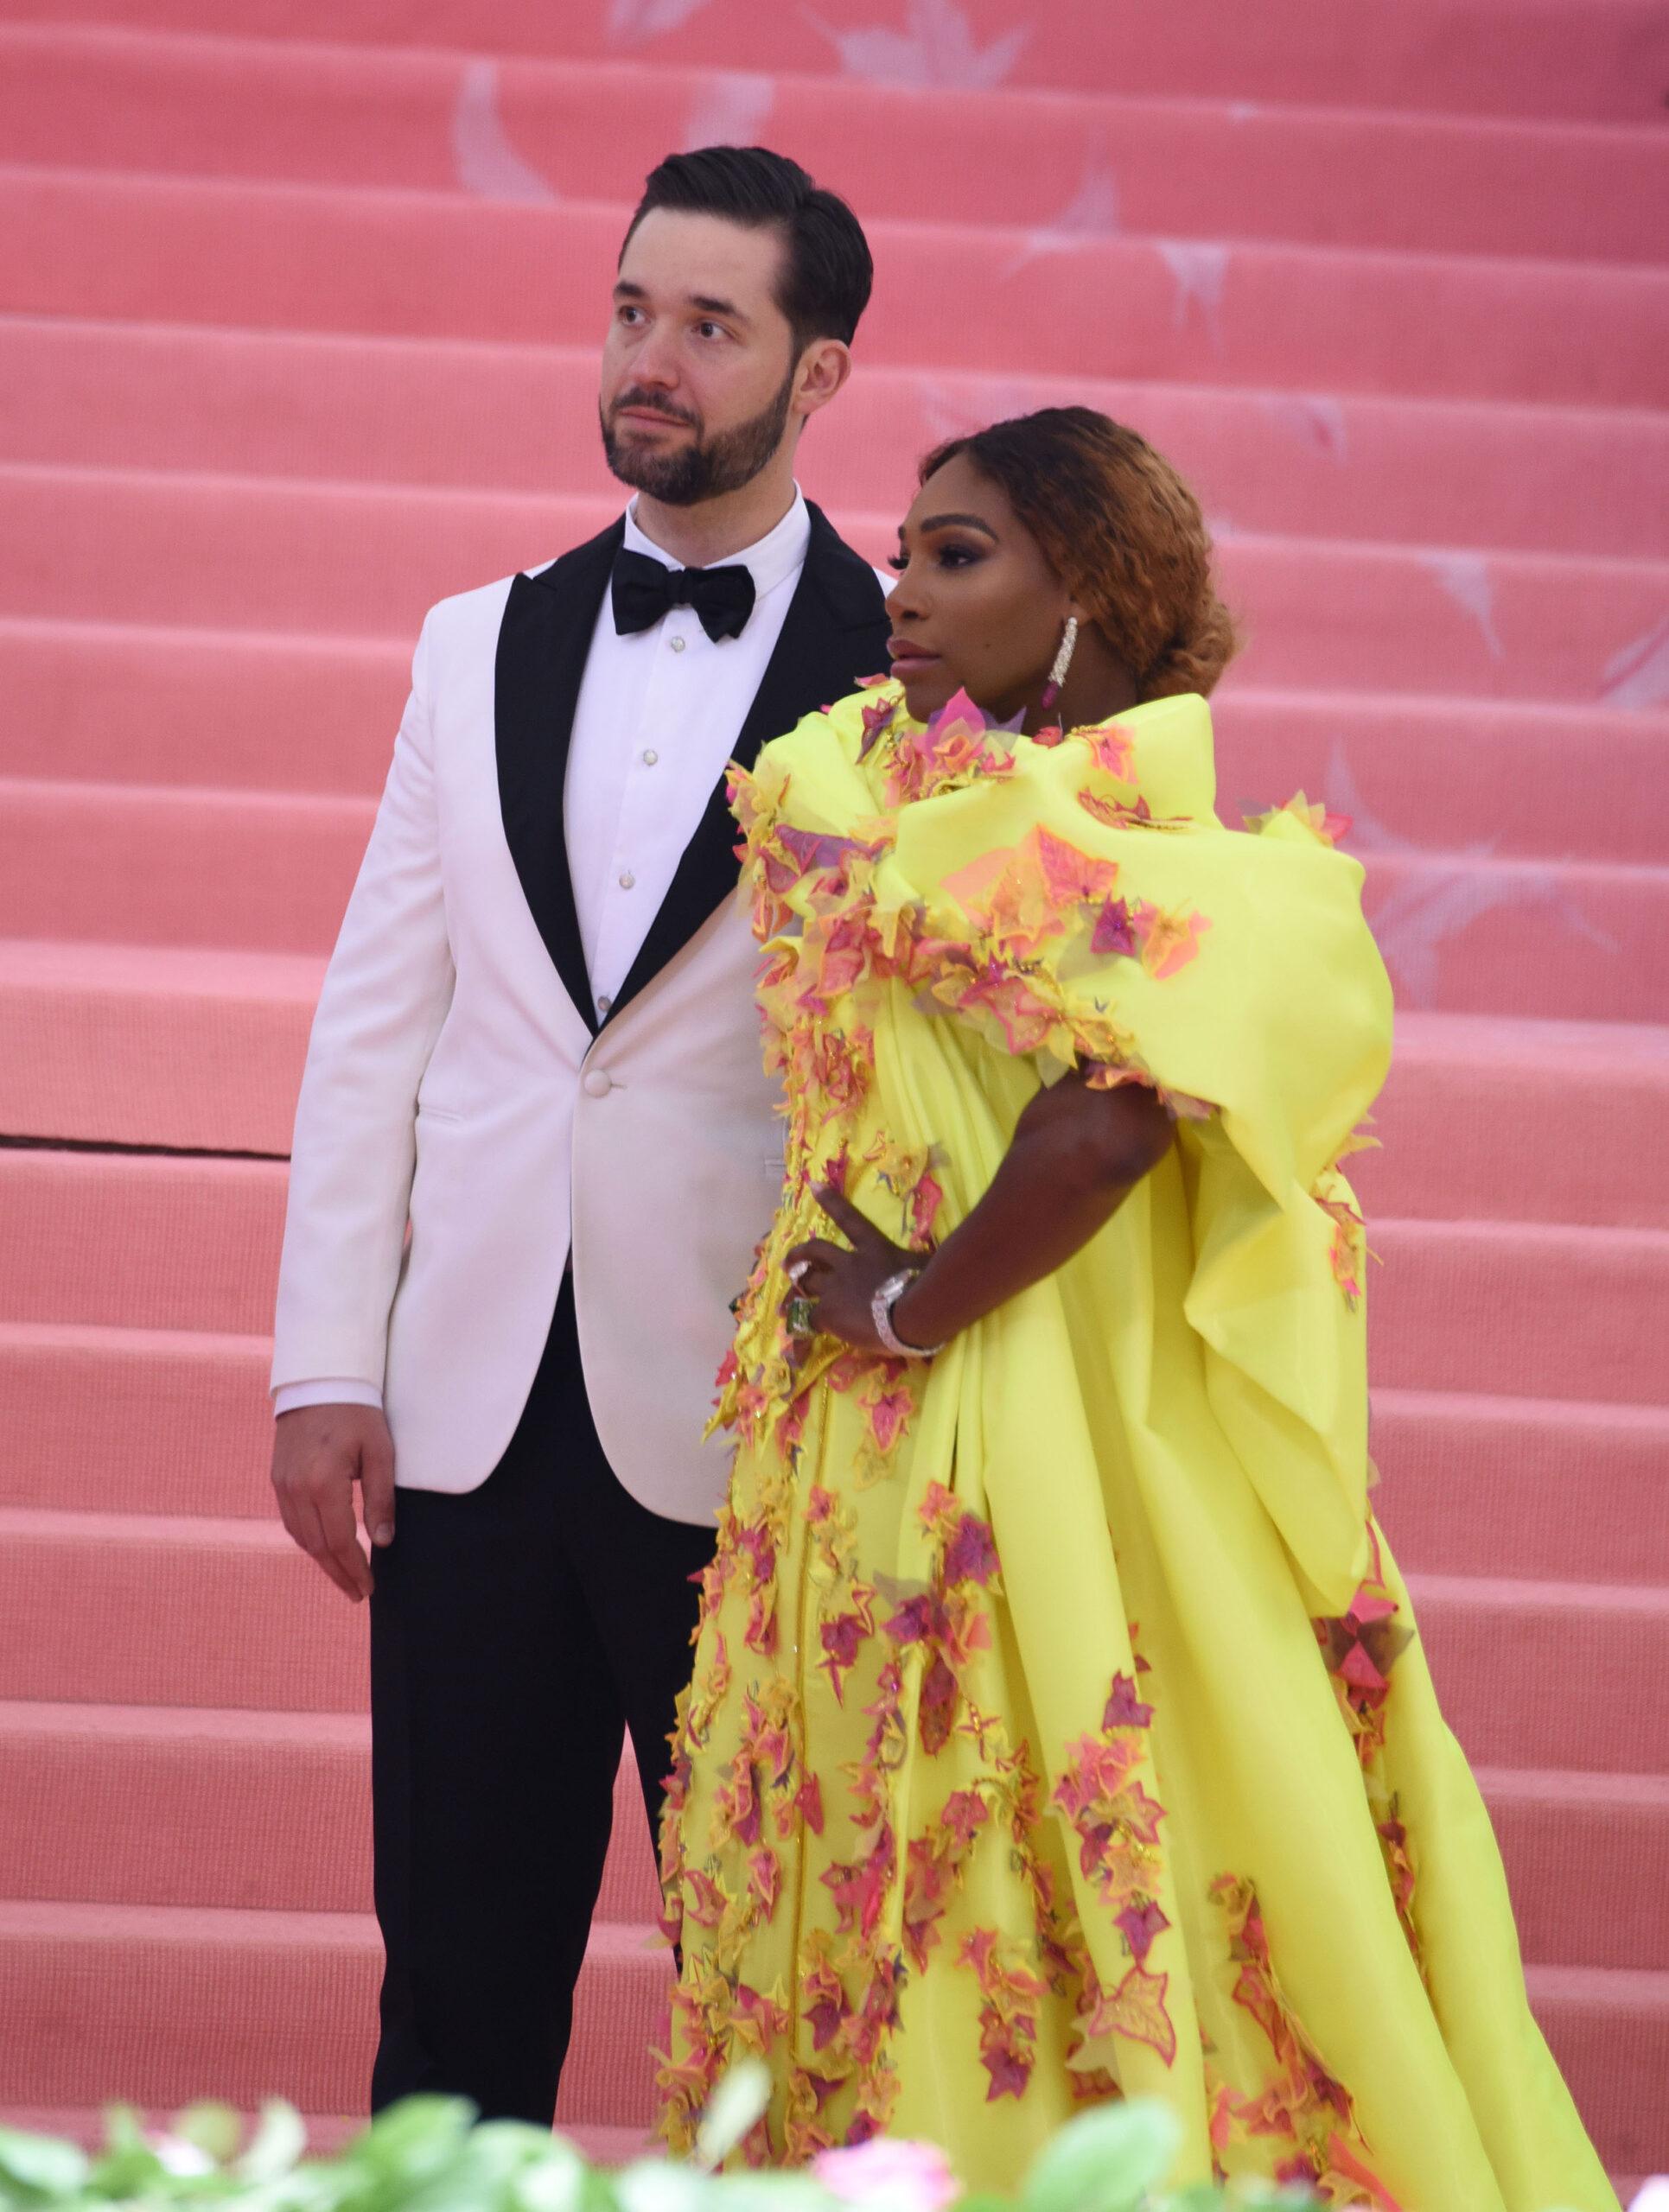 Serena Williams & Alexis Ohanian at The 2019 Met Gala